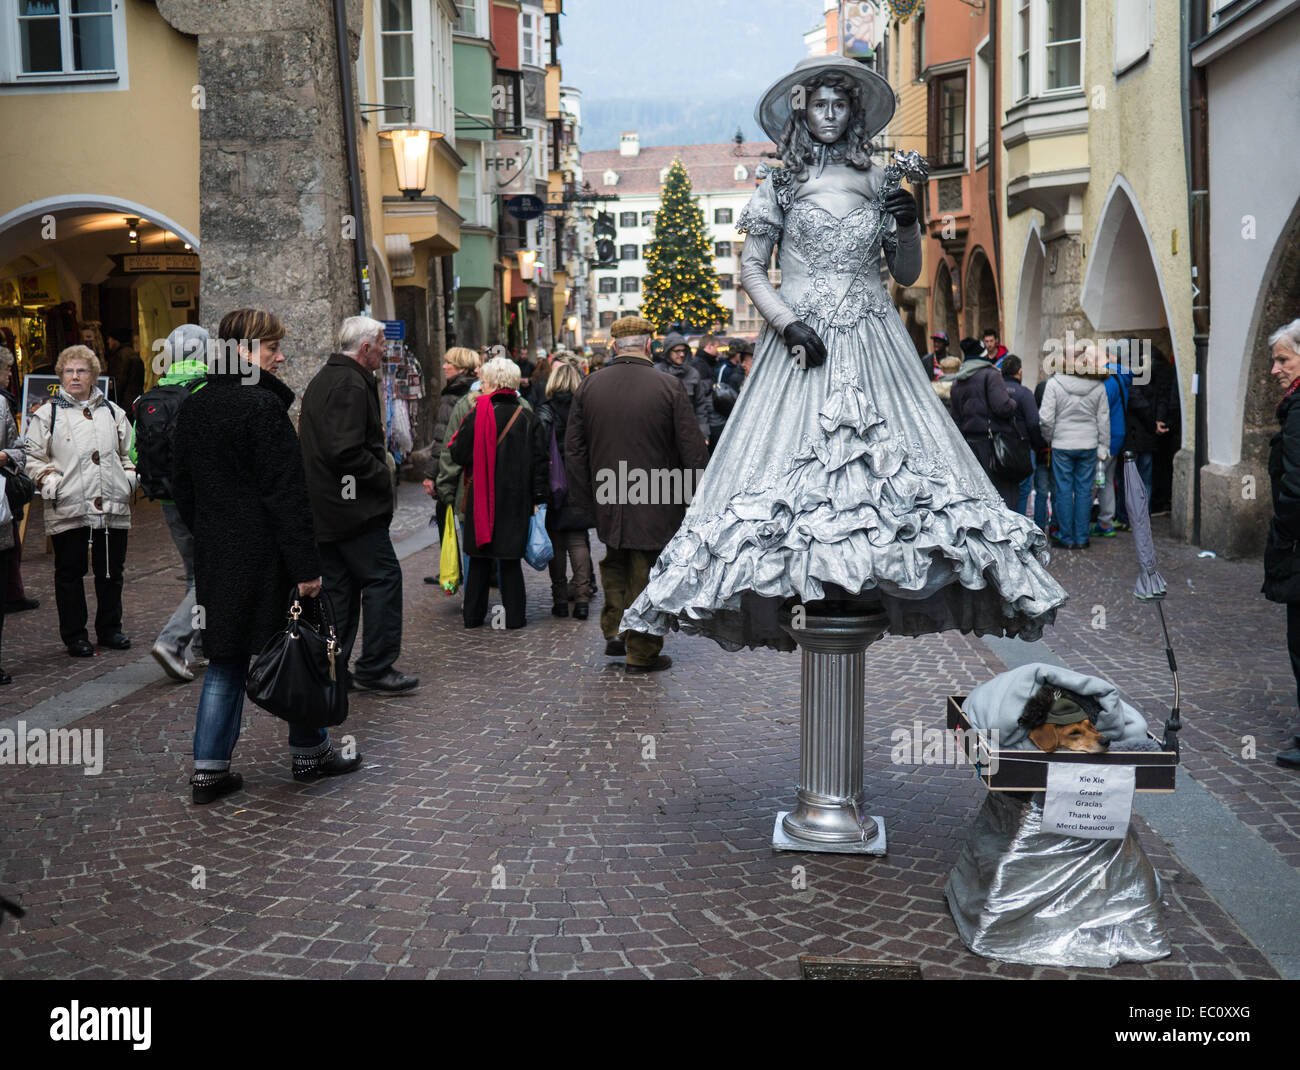 A human statue stands with a dog in Innsbruck's Altstadt (Old Town) Stock Photo